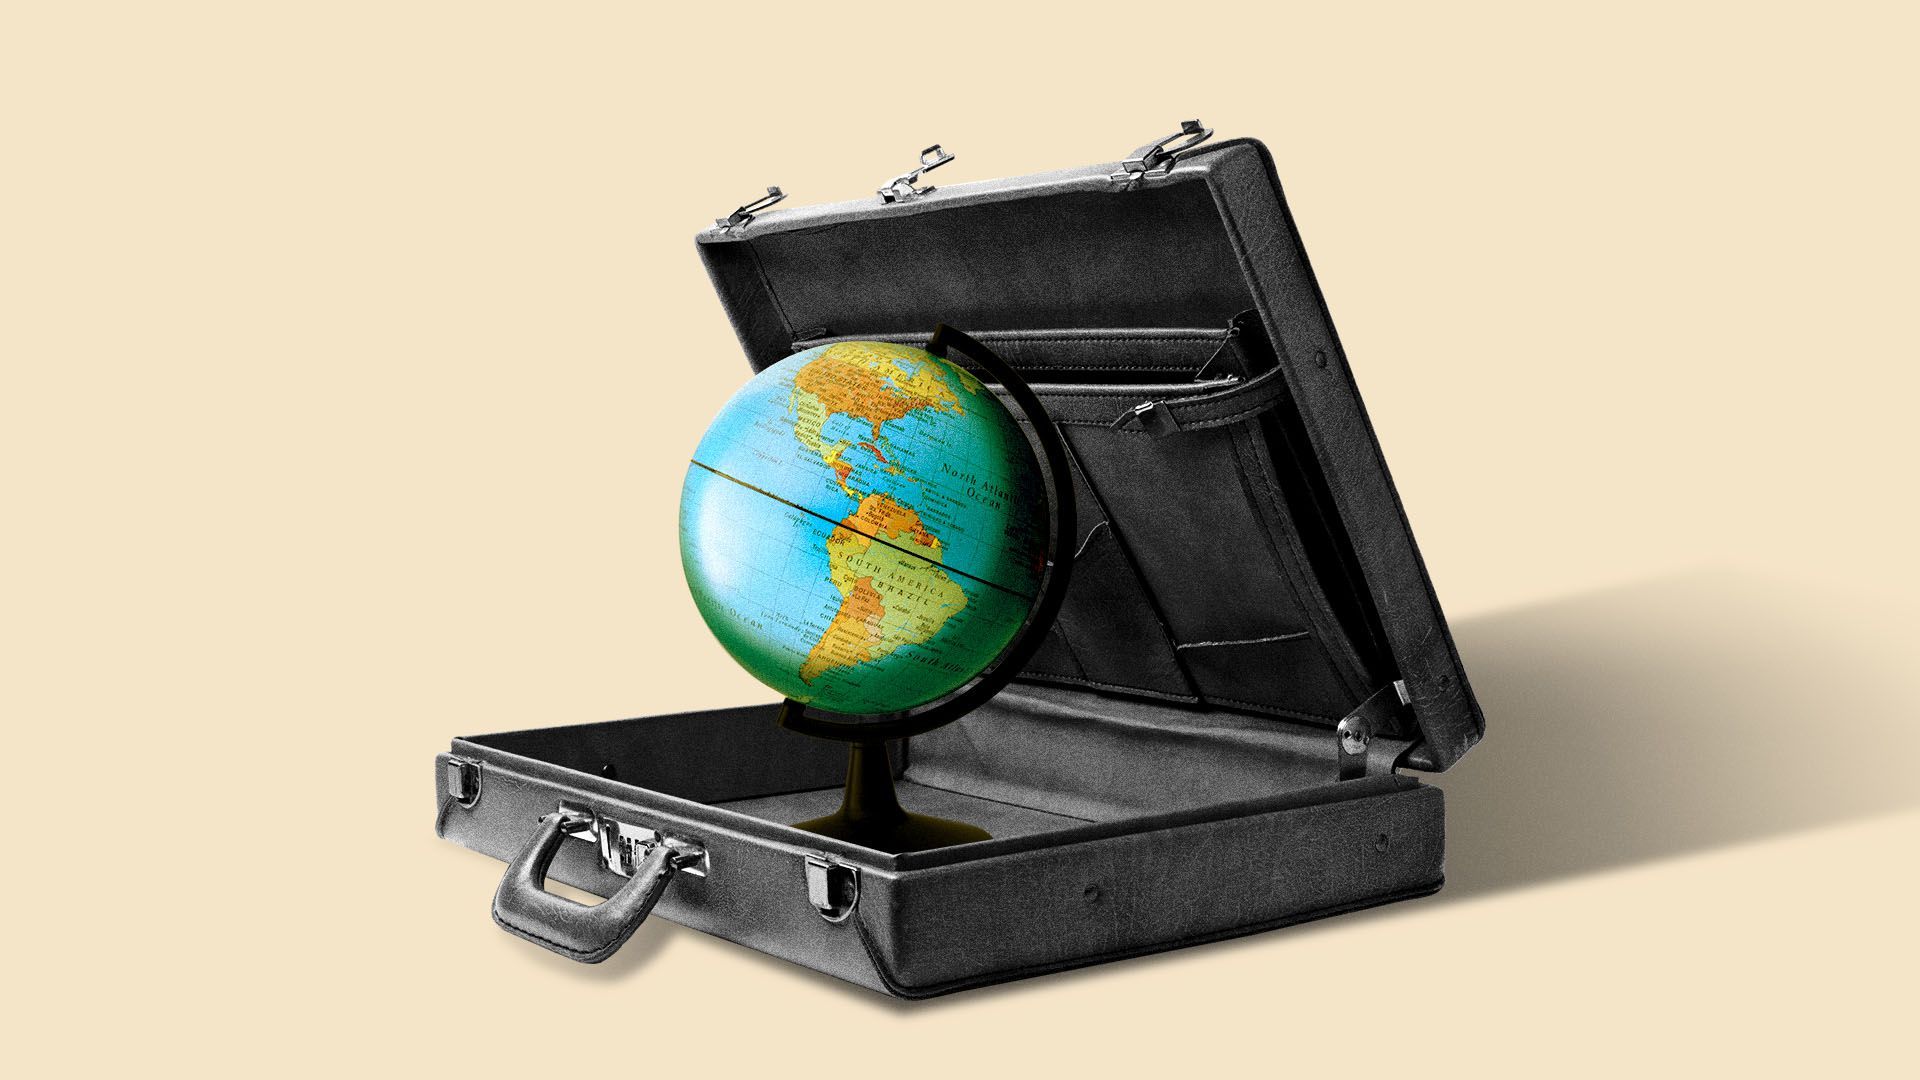 A globe is displayed in a suitcase.